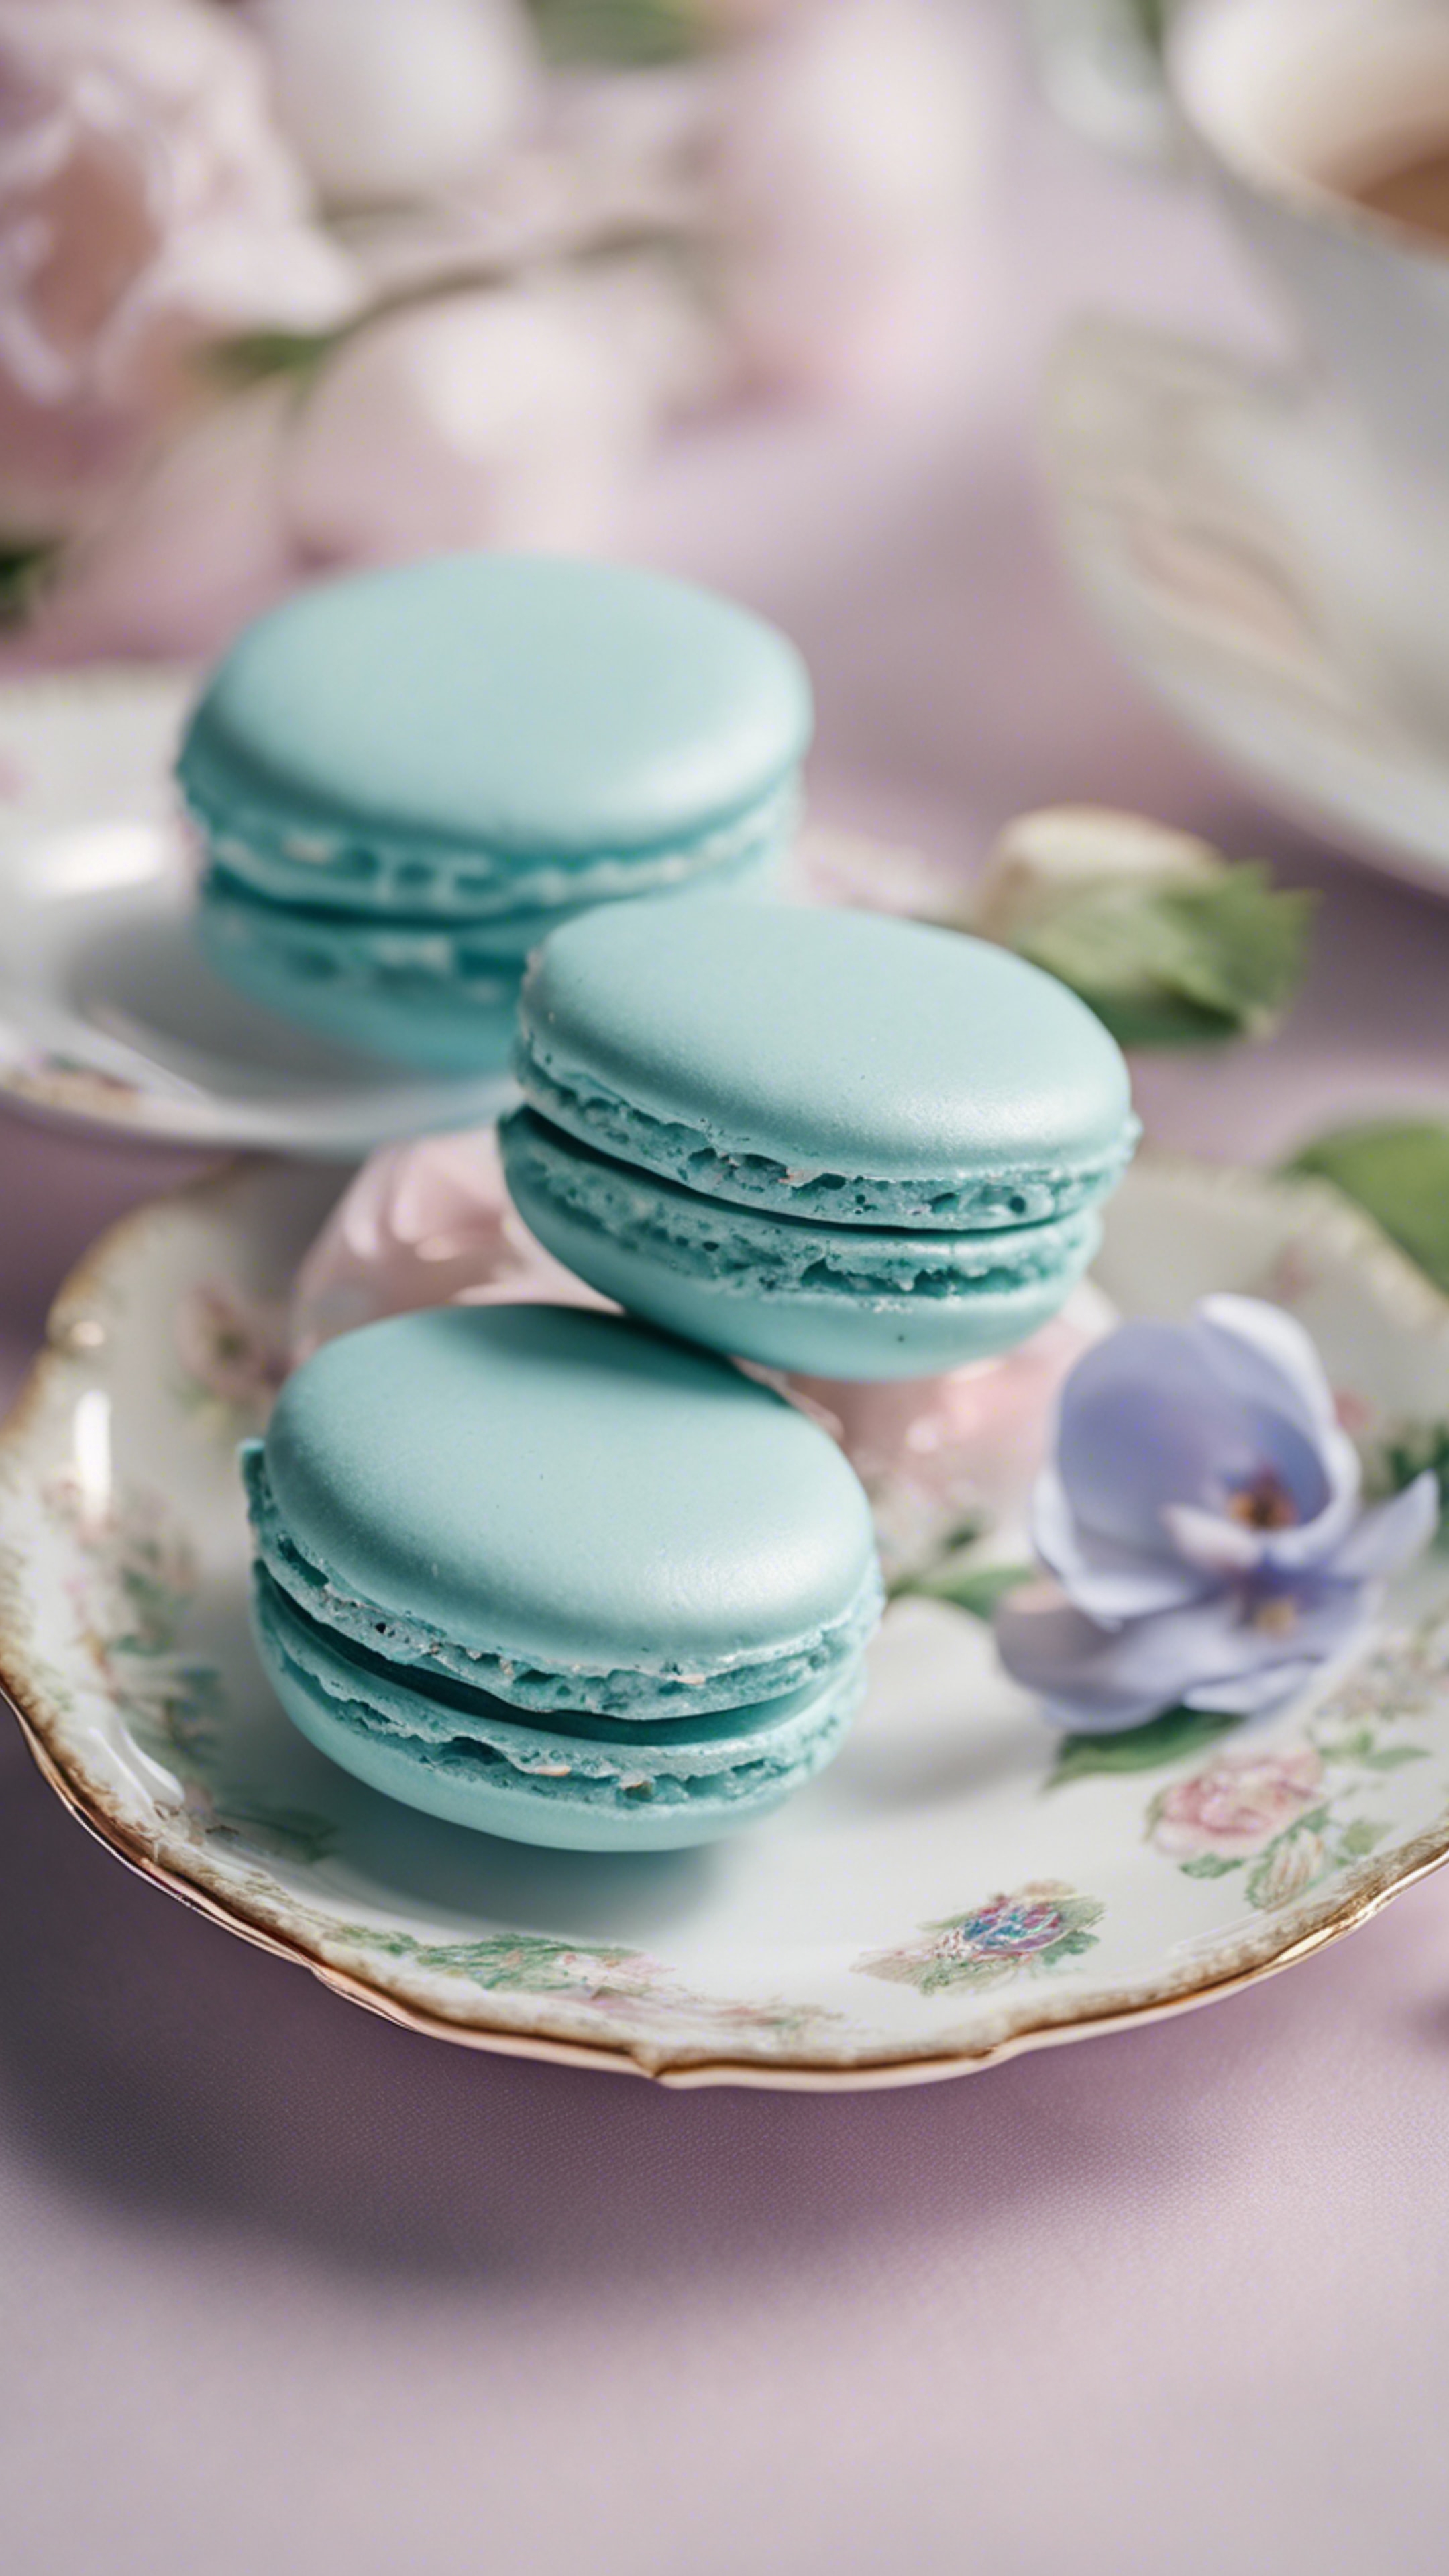 A pair of pastel blue French macarons on a dainty floral china plate. Валлпапер[cc240826fa4e4ee284e3]